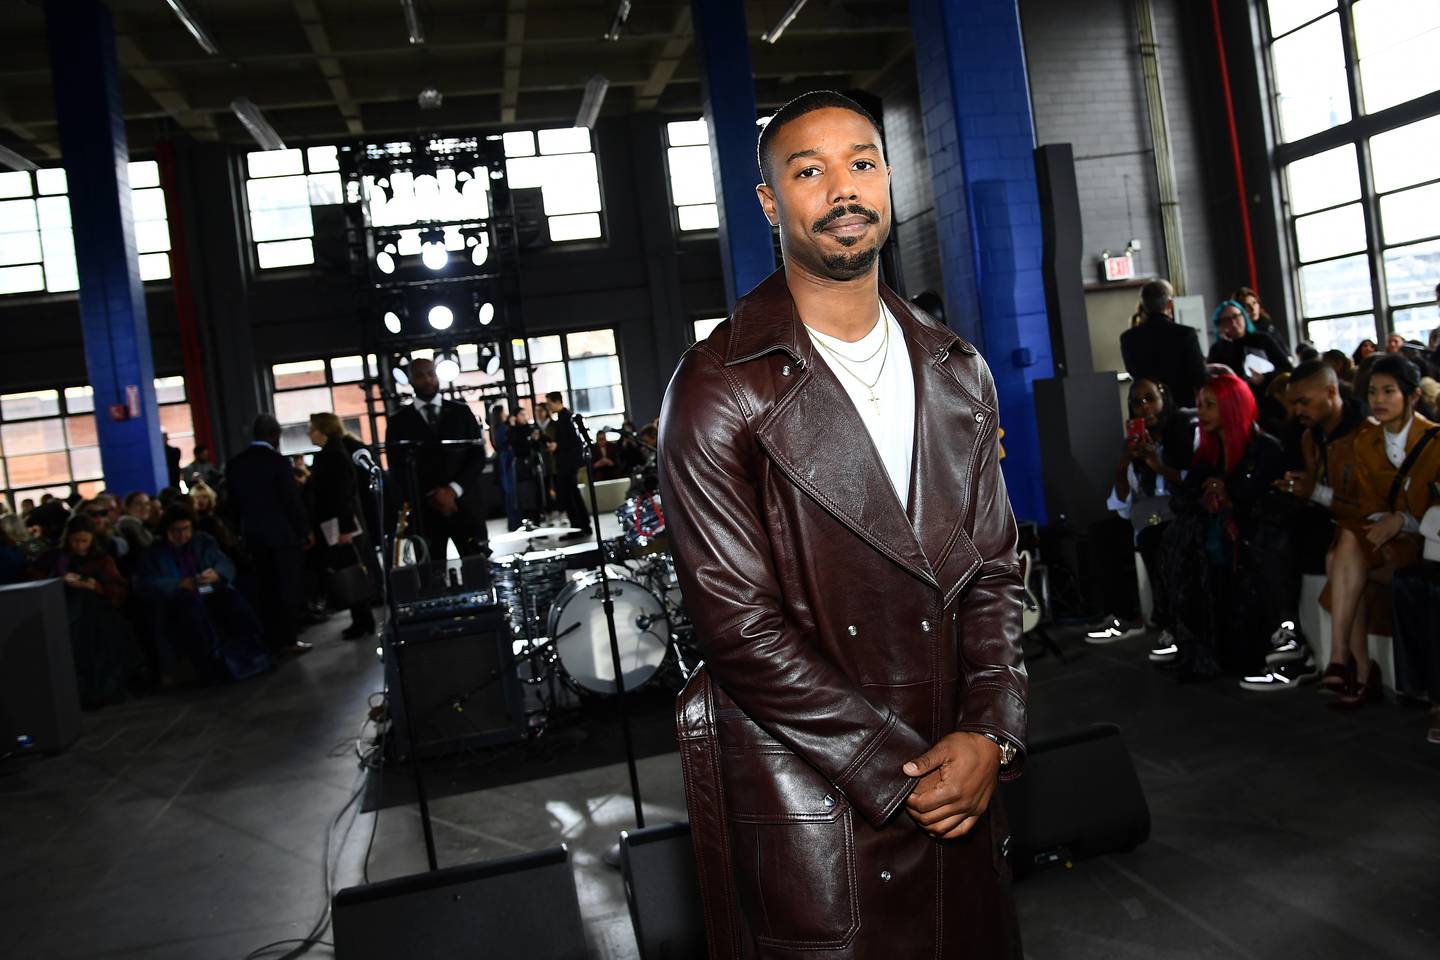 Michael B. Jordan attends the Coach 1941 fashion show during February 2020 - New York Fashion Week. Getty Images.